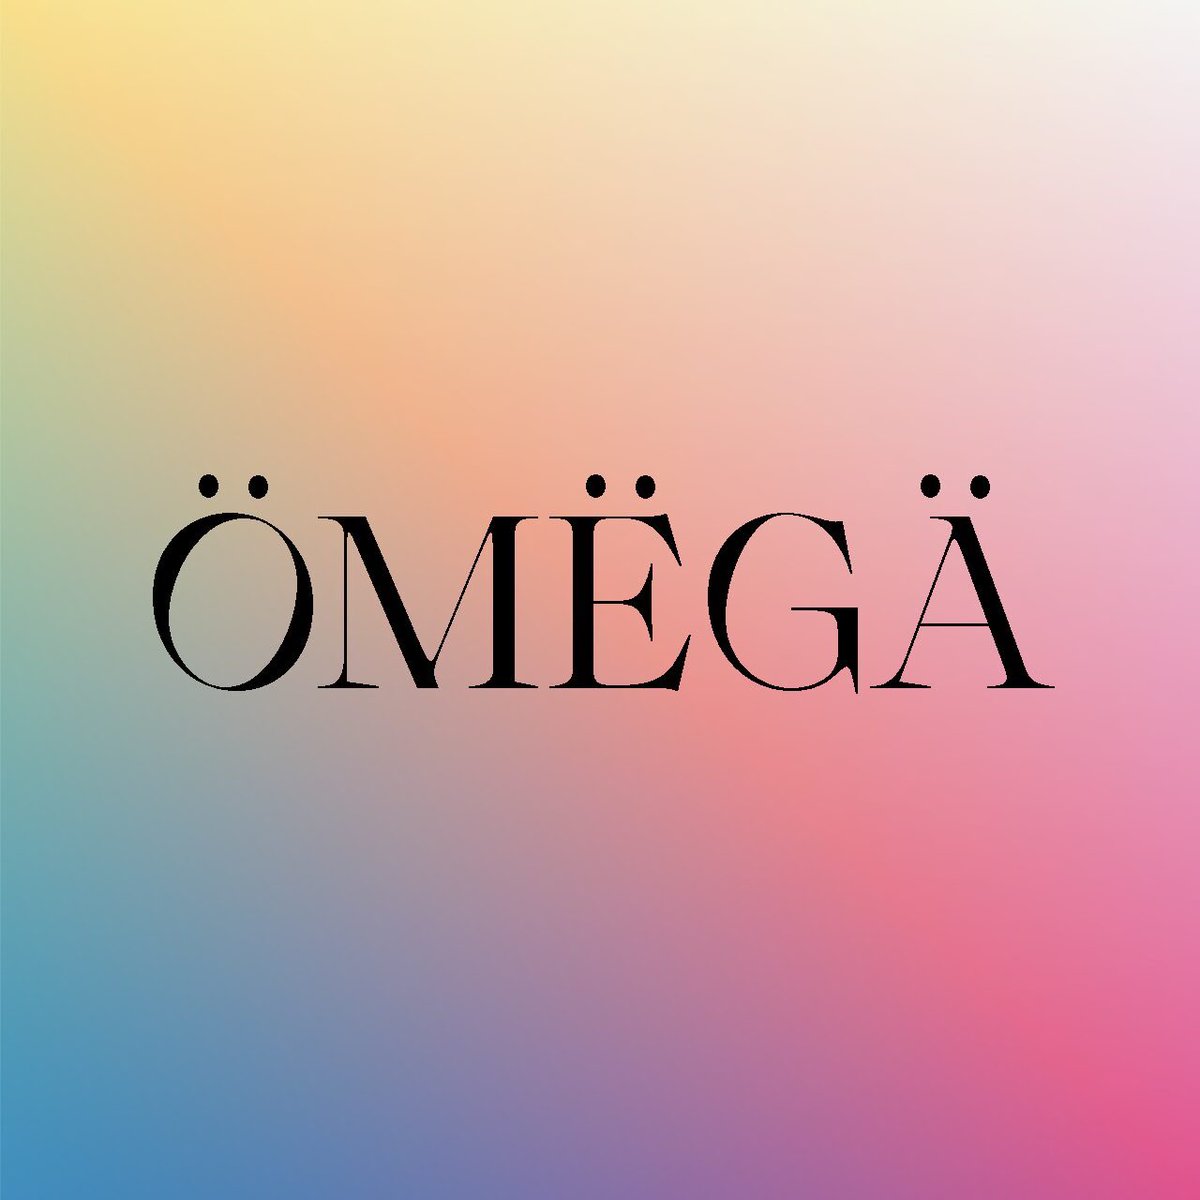 She’s back and better than ever! We are 𝑒𝓁𝒶𝓉𝑒𝒹 to share ÖMËGÄ, our brand-new take on our classic blog, with you. metatron.press/omega